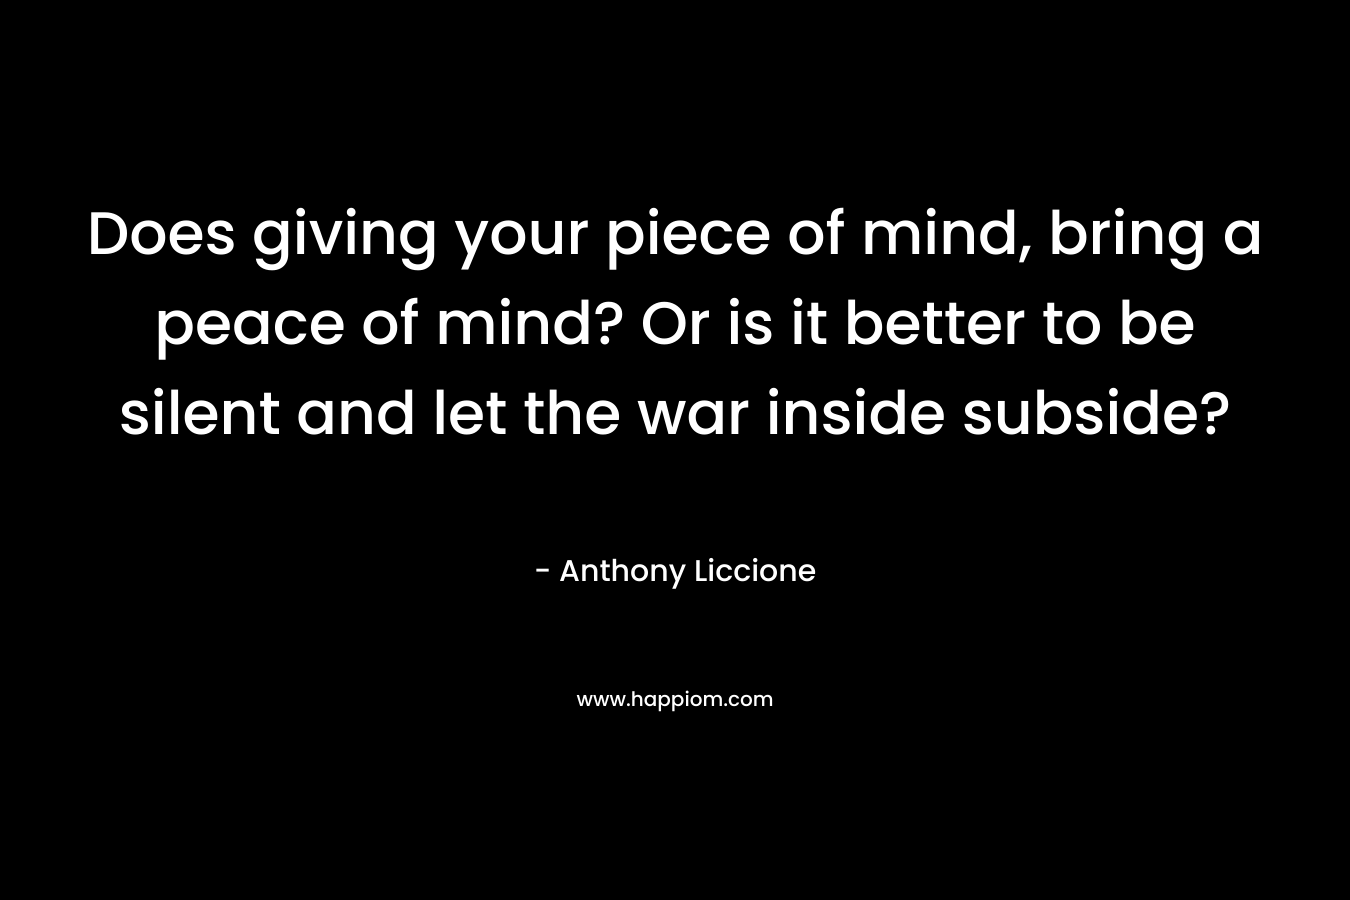 Does giving your piece of mind, bring a peace of mind? Or is it better to be silent and let the war inside subside? – Anthony Liccione